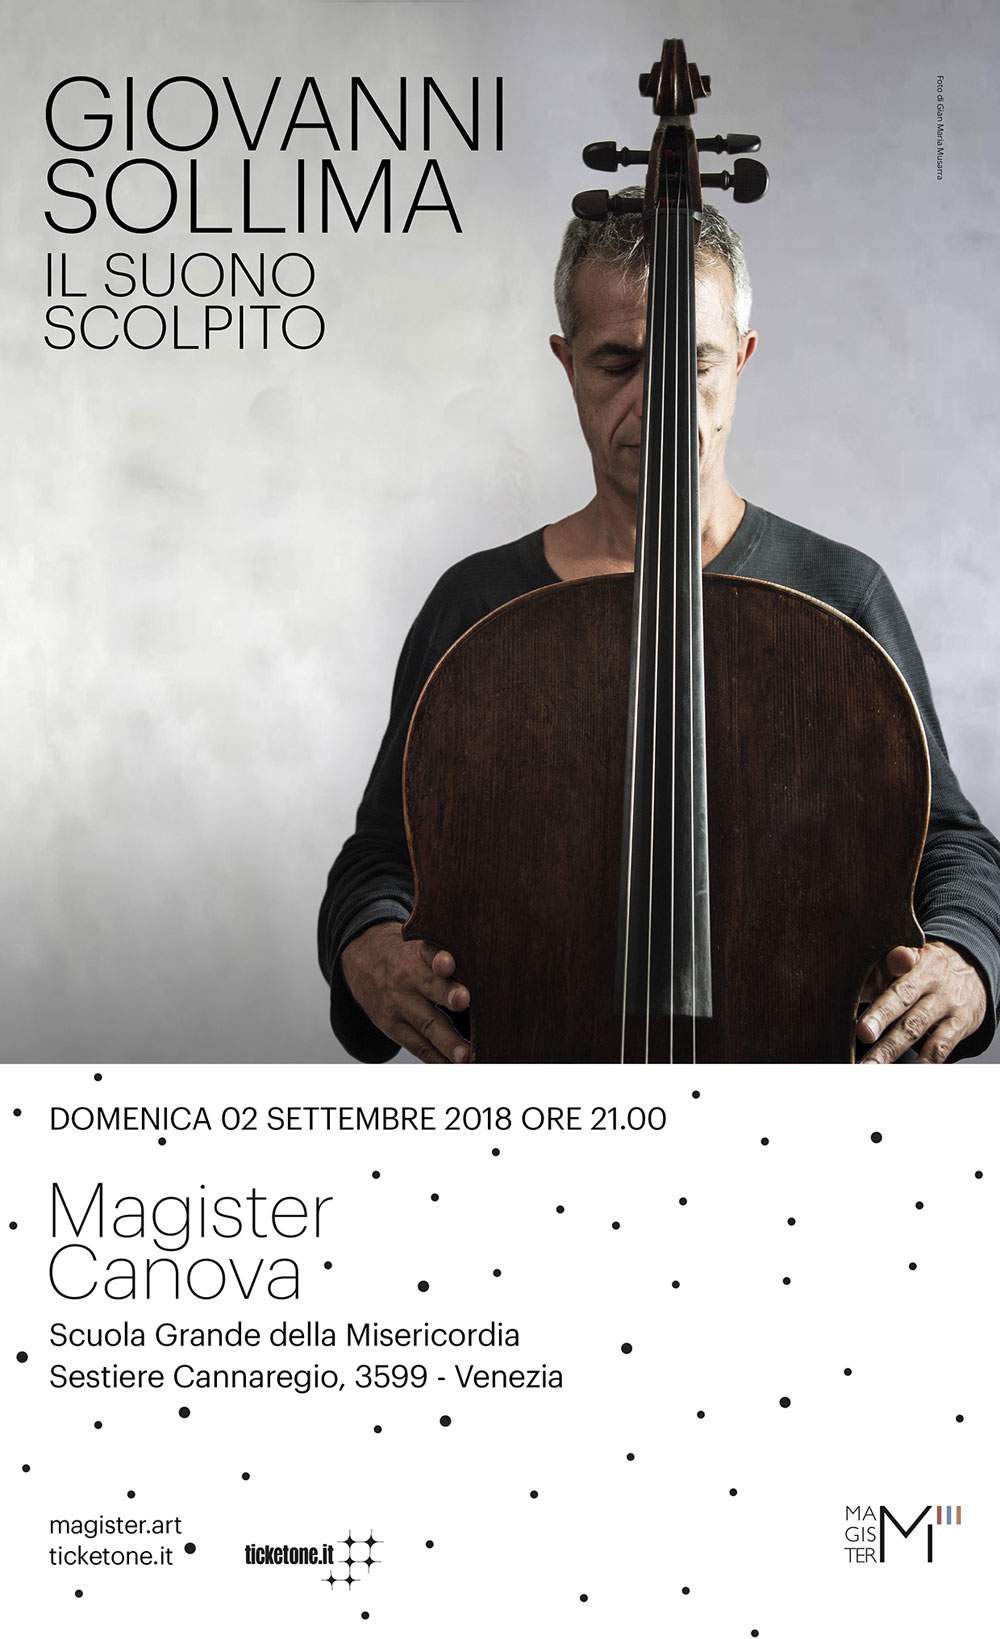 Exclusive concert by Giovanni Sollima on the occasion of Magister Canova 